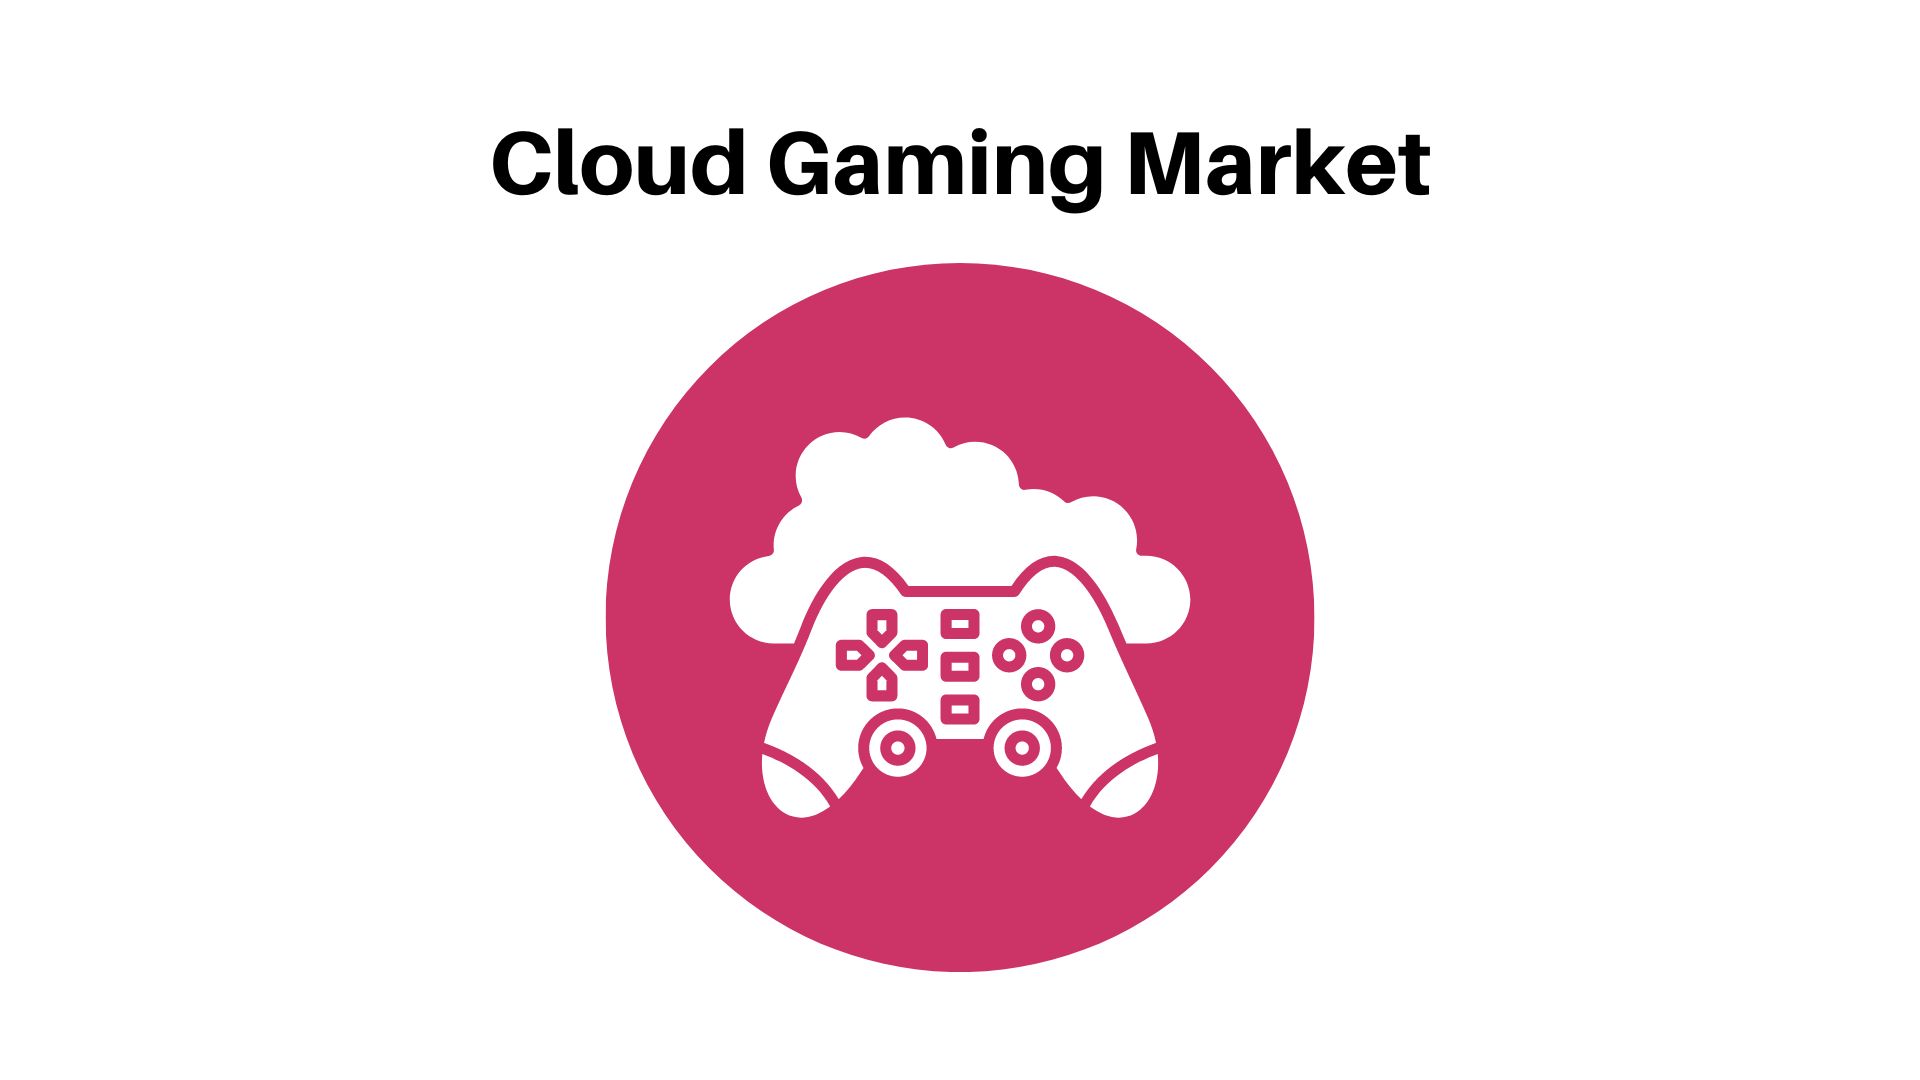 Cloud Gaming Market Value to Hit USD 49.05 Billion by 2032 | At a CAGR of 47.3%